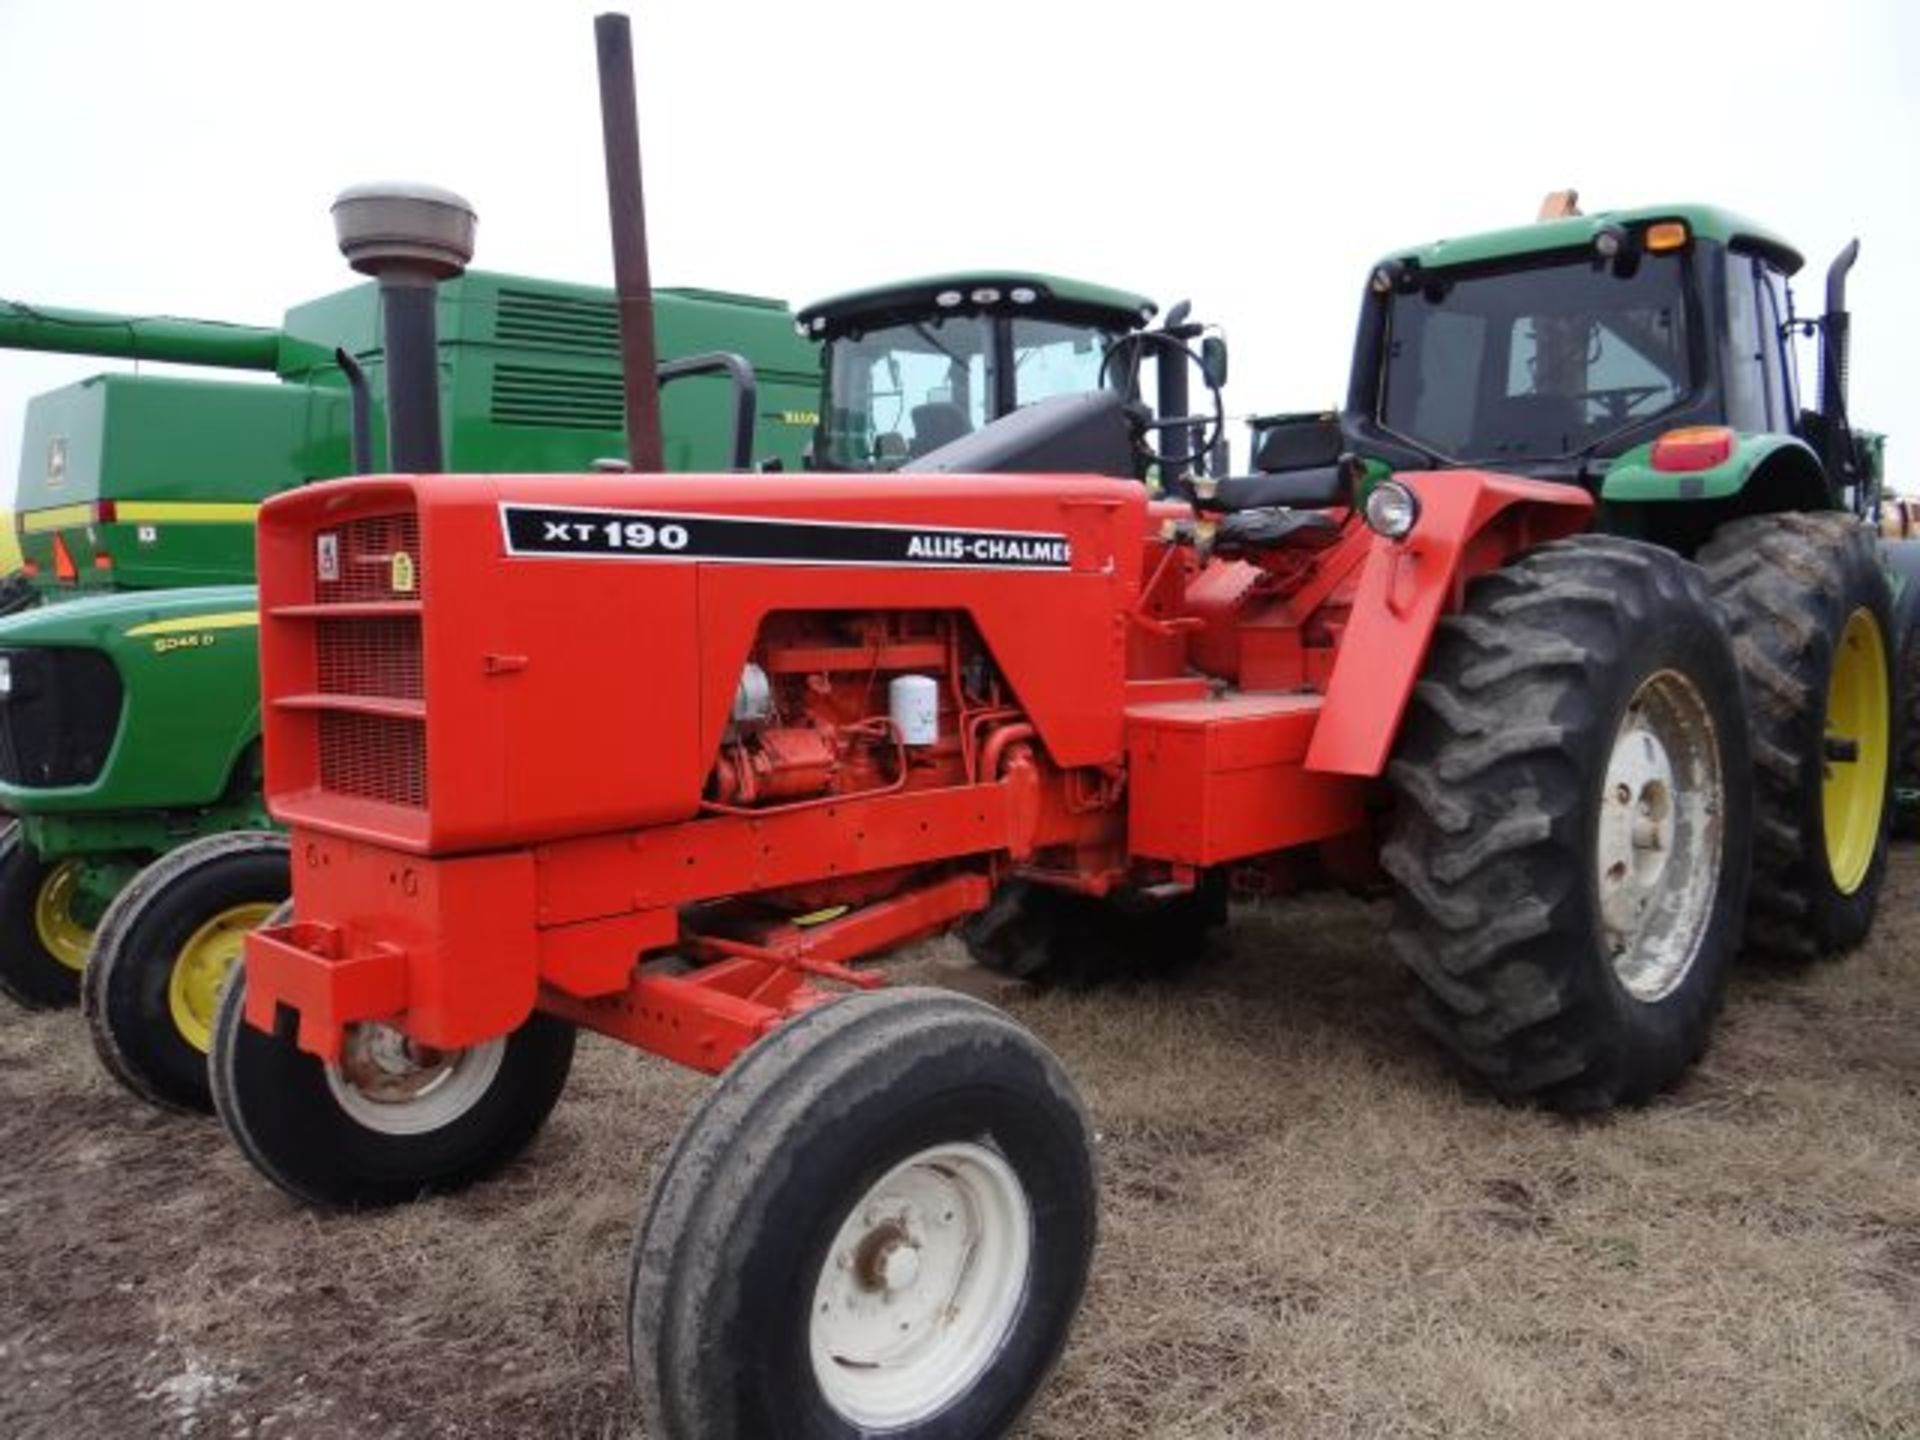 Lot # 1167 AC 190XT Tractor, 1966 #110077, OS, Diesel, 2 SCVs, Does Not Jump out of Gear